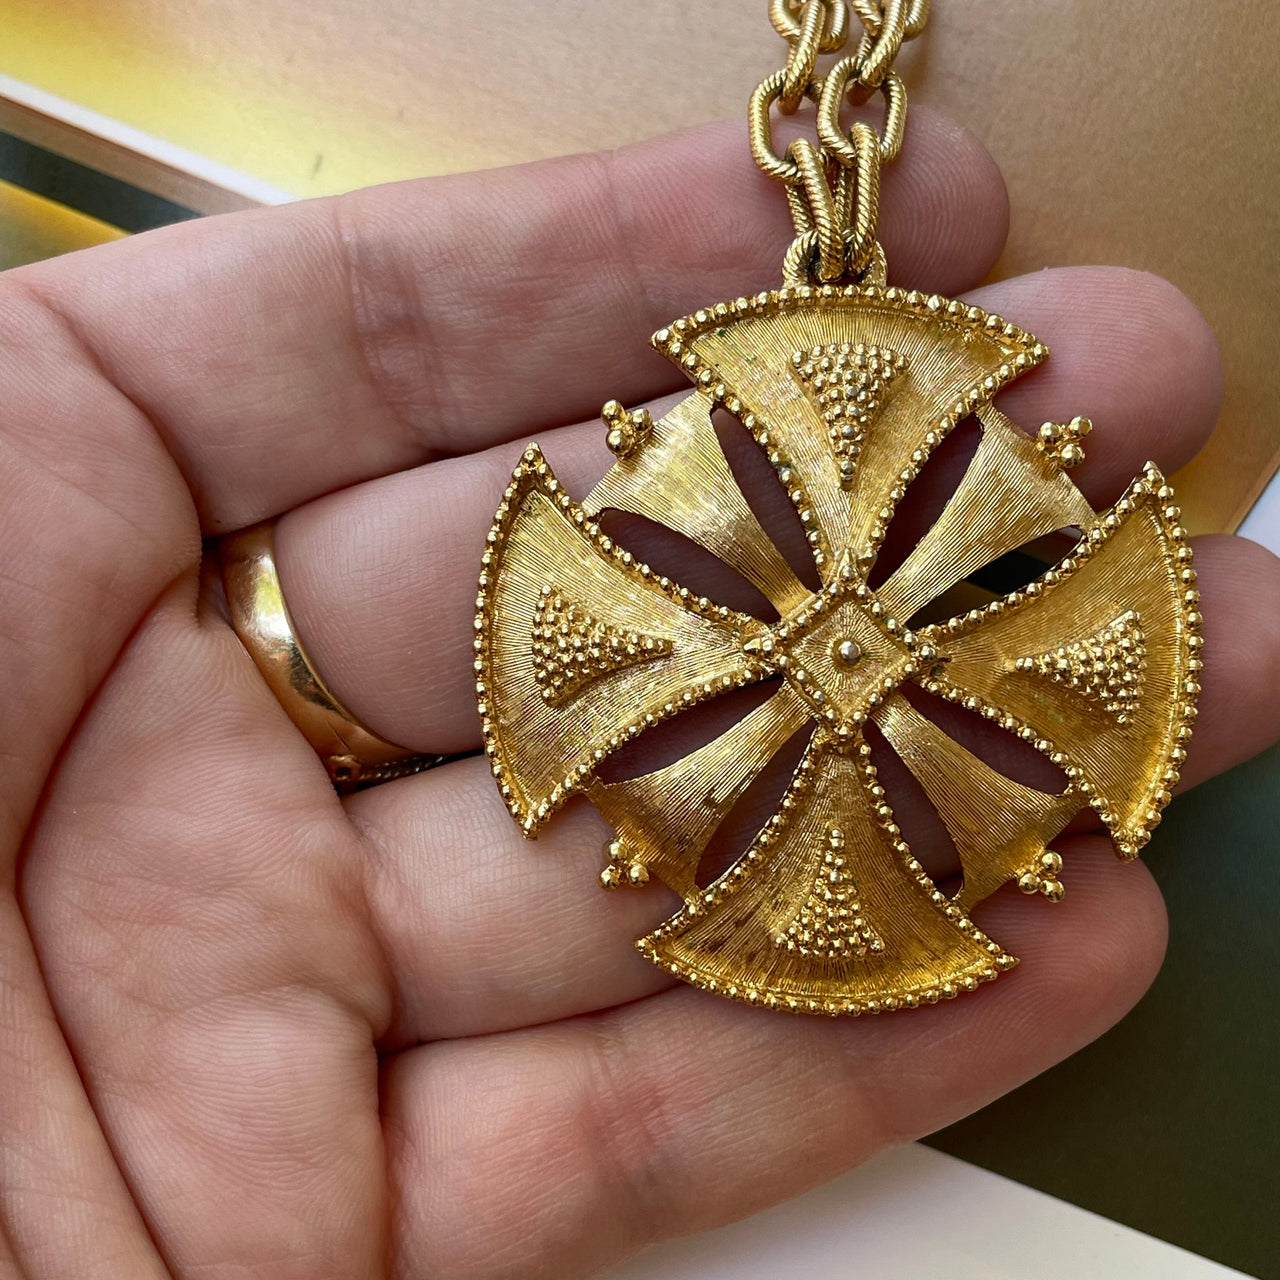 Monet Gold Rounded Maltese Cross Pendant Jewelry Bloomers and Frocks 